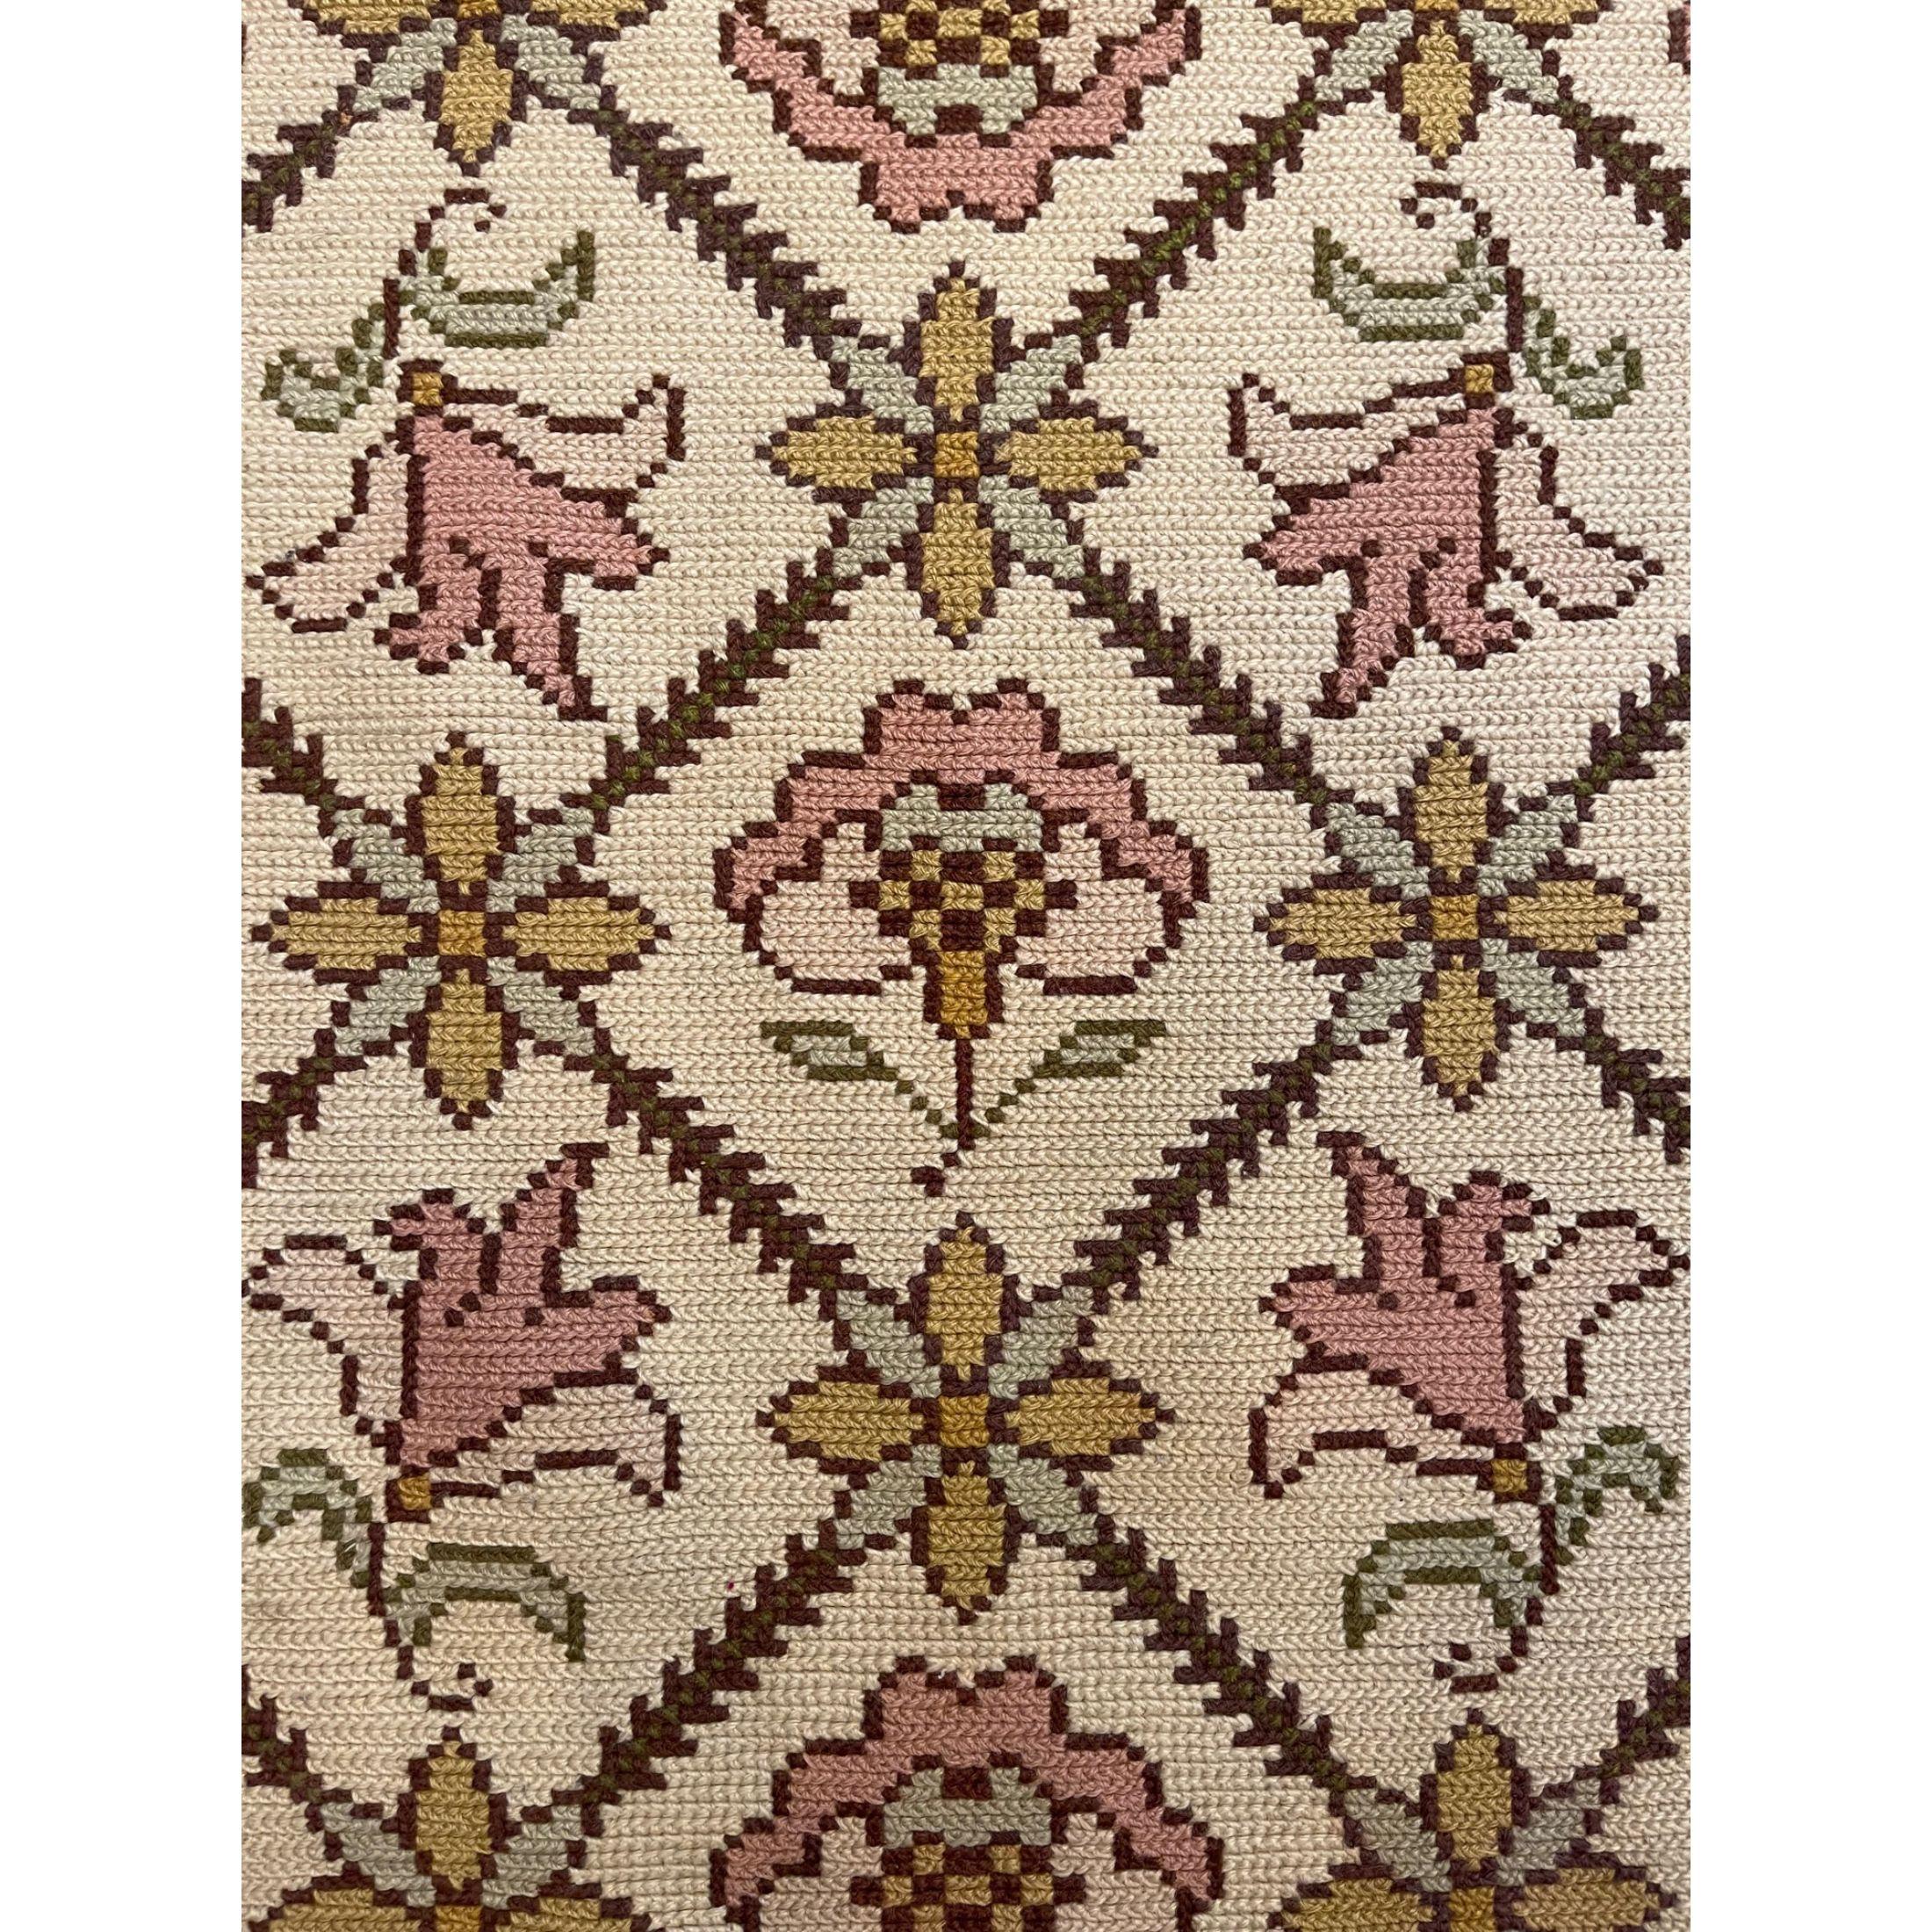 Needlepoint rugs were created using the traditional needlework weaving technique that is used to make everyday items from furniture to carpets and artwork. However, it has a fascinating history both as a hobby and as an industry. When many people